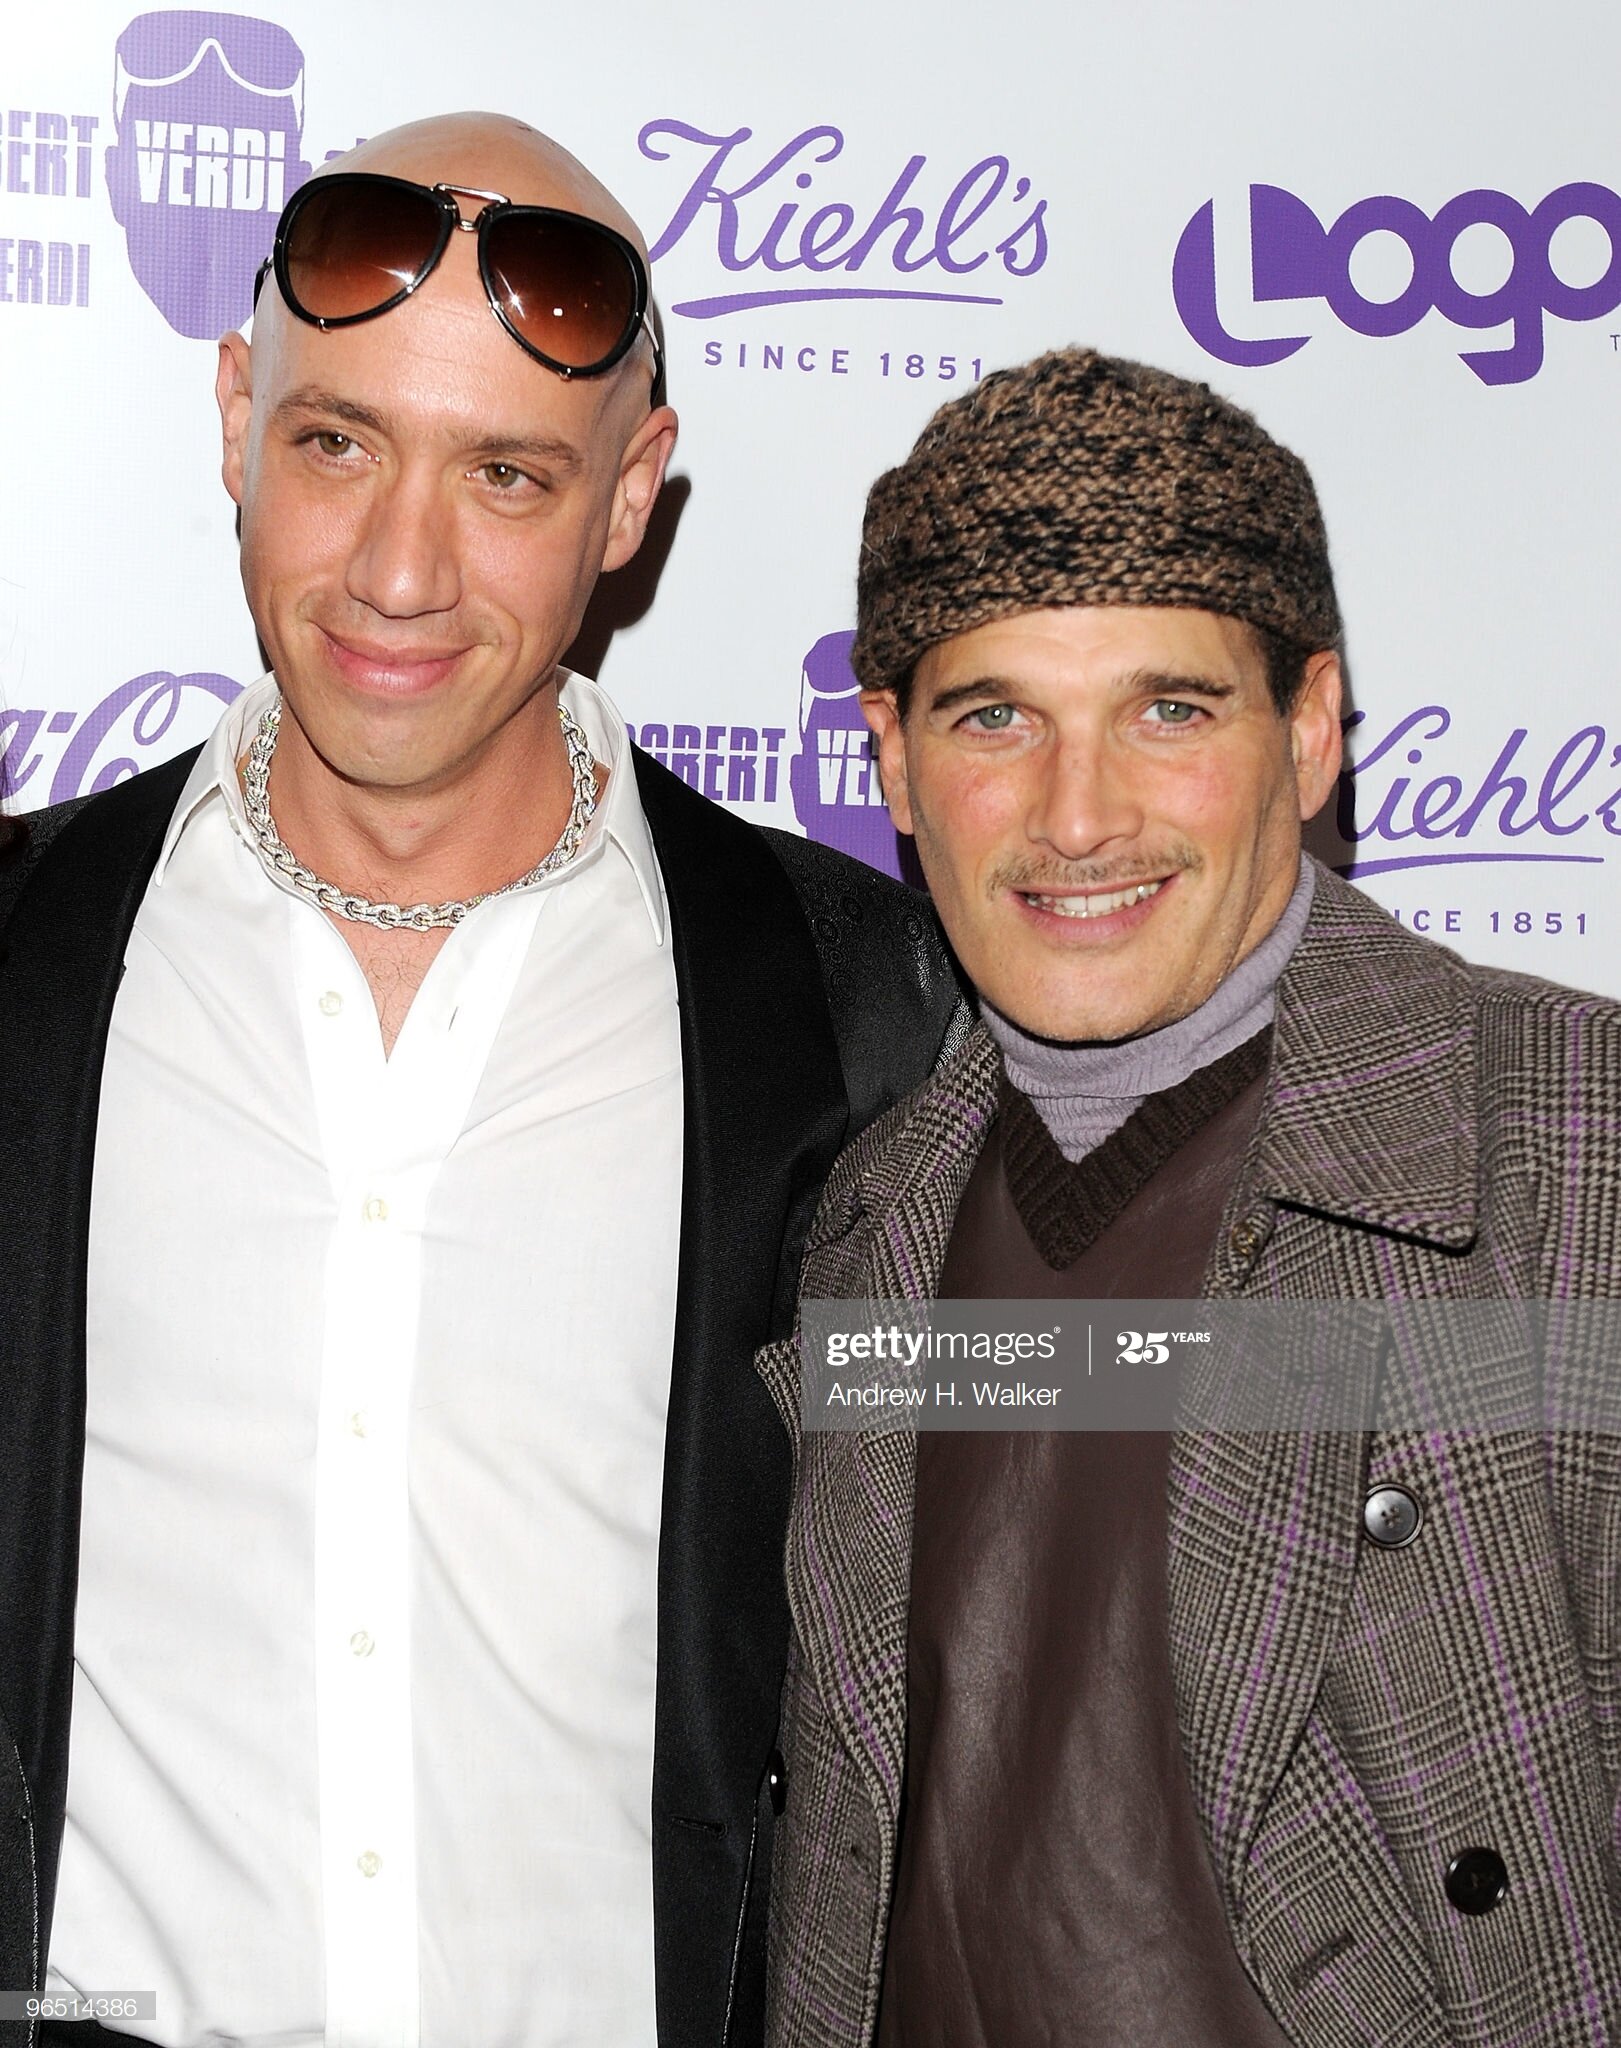  NEW YORK - FEBRUARY 08:  (L-R) Robert Verdi and Philip Bloch attend the premiere screening of "The Robert Verdi Show Starring Robert Verdi" at the SVA Theater on February 8, 2010 in New York City.  (Photo by Andrew H. Walker/Getty Images) 